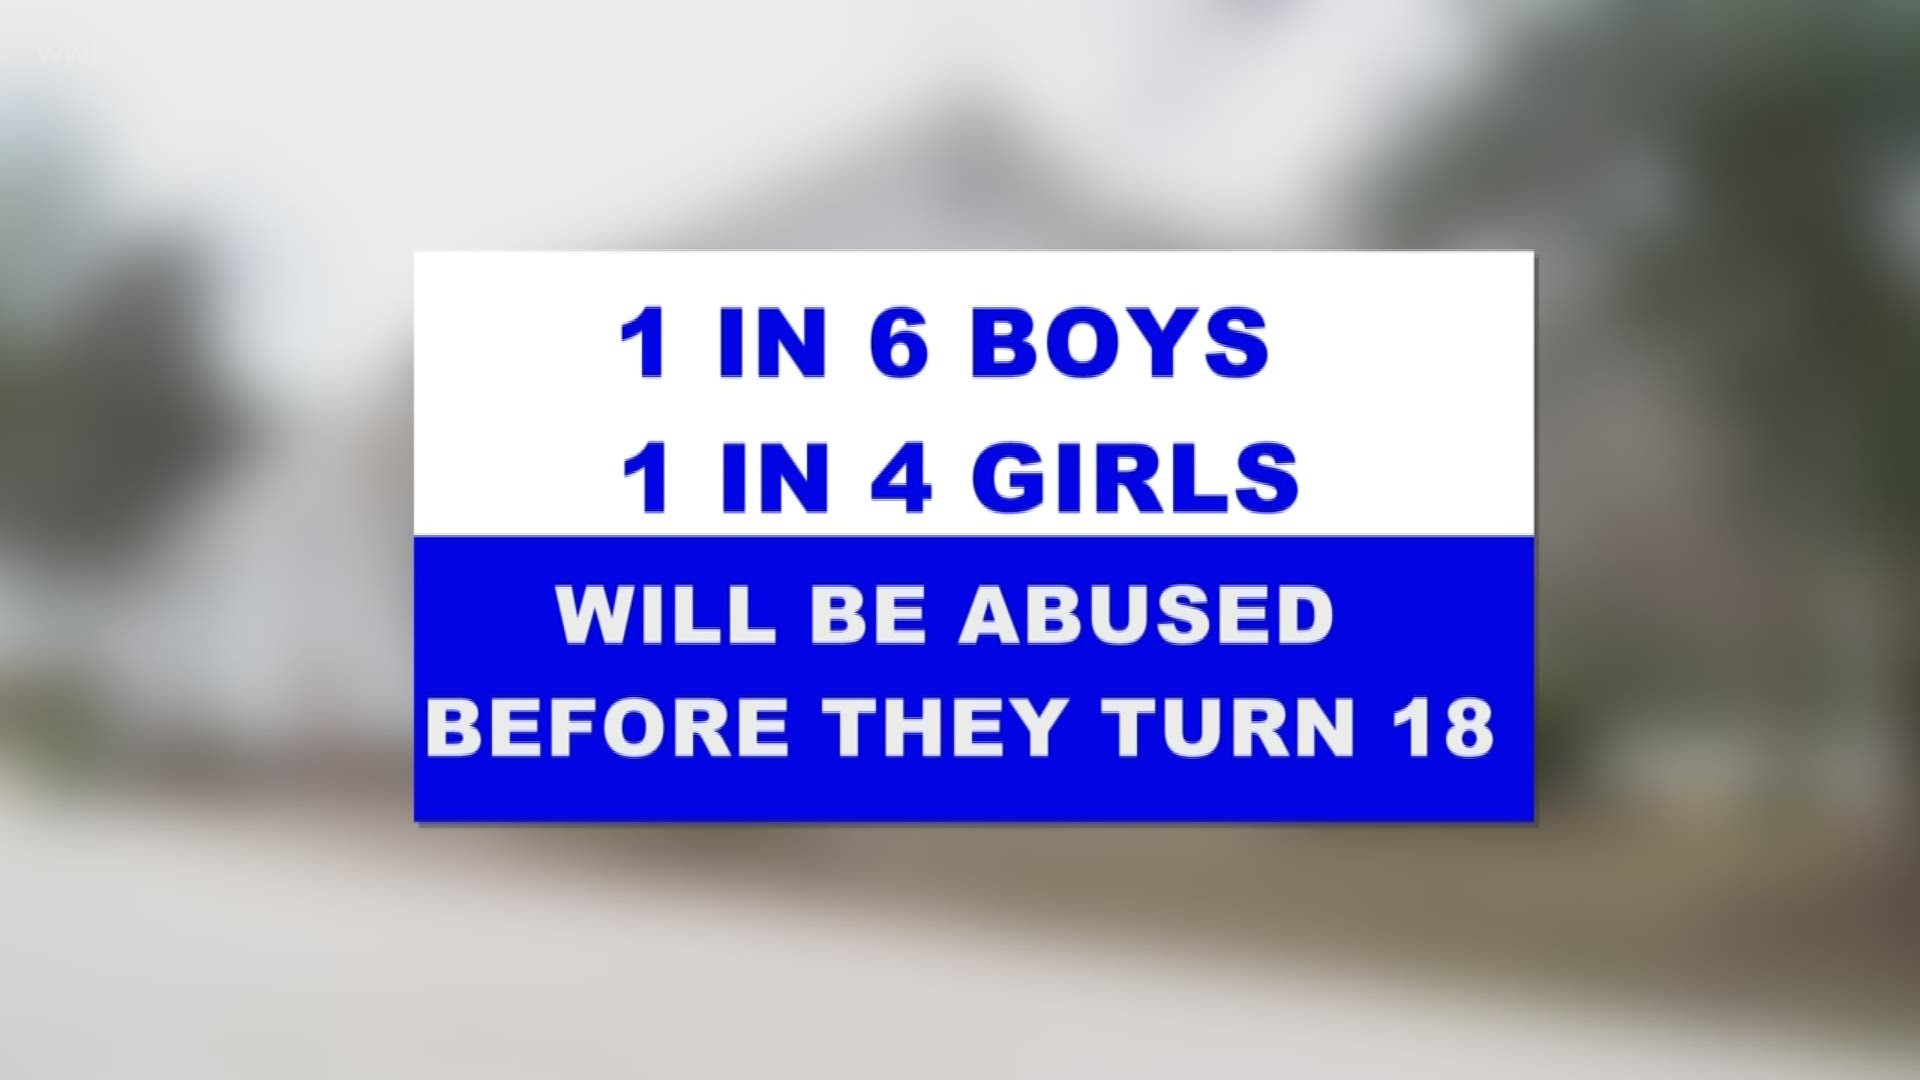 1 in 6 boys and 1 in 4 girls will be abused before they turn 18 years old. And that sexual abuse can impact a child in many ways.